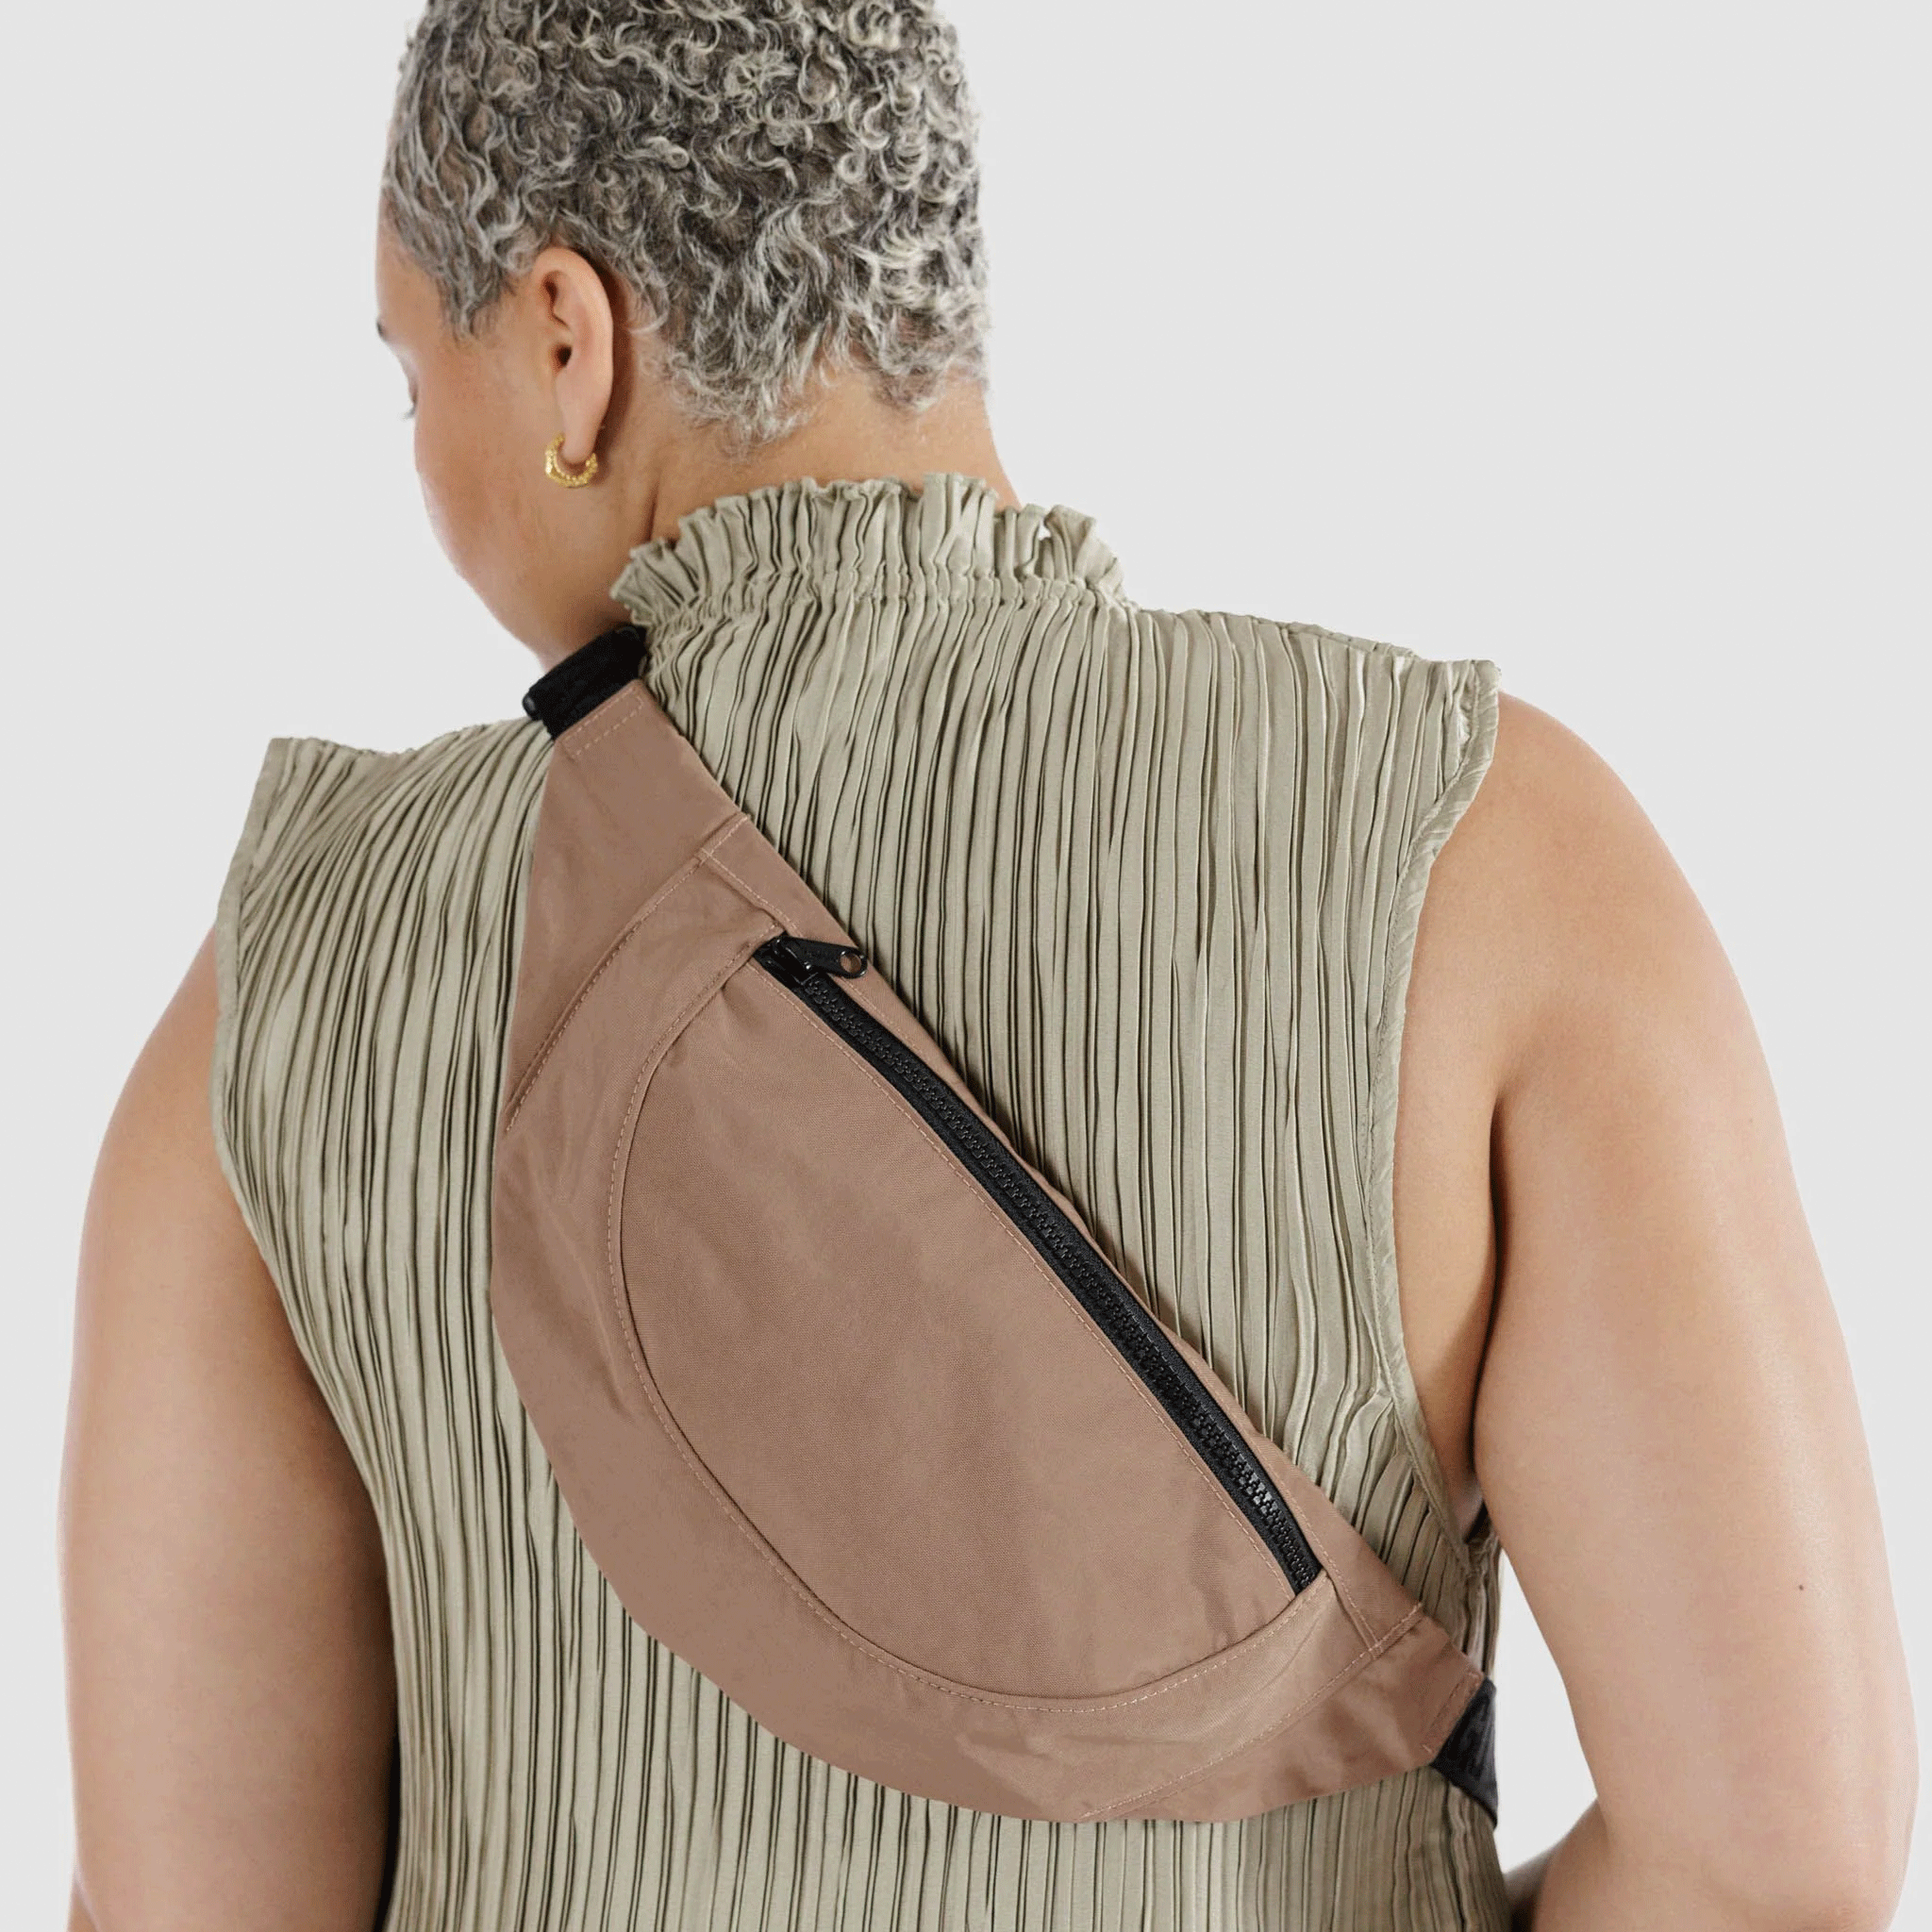 On a white background is a model wearing a light brown fanny pack with black details.